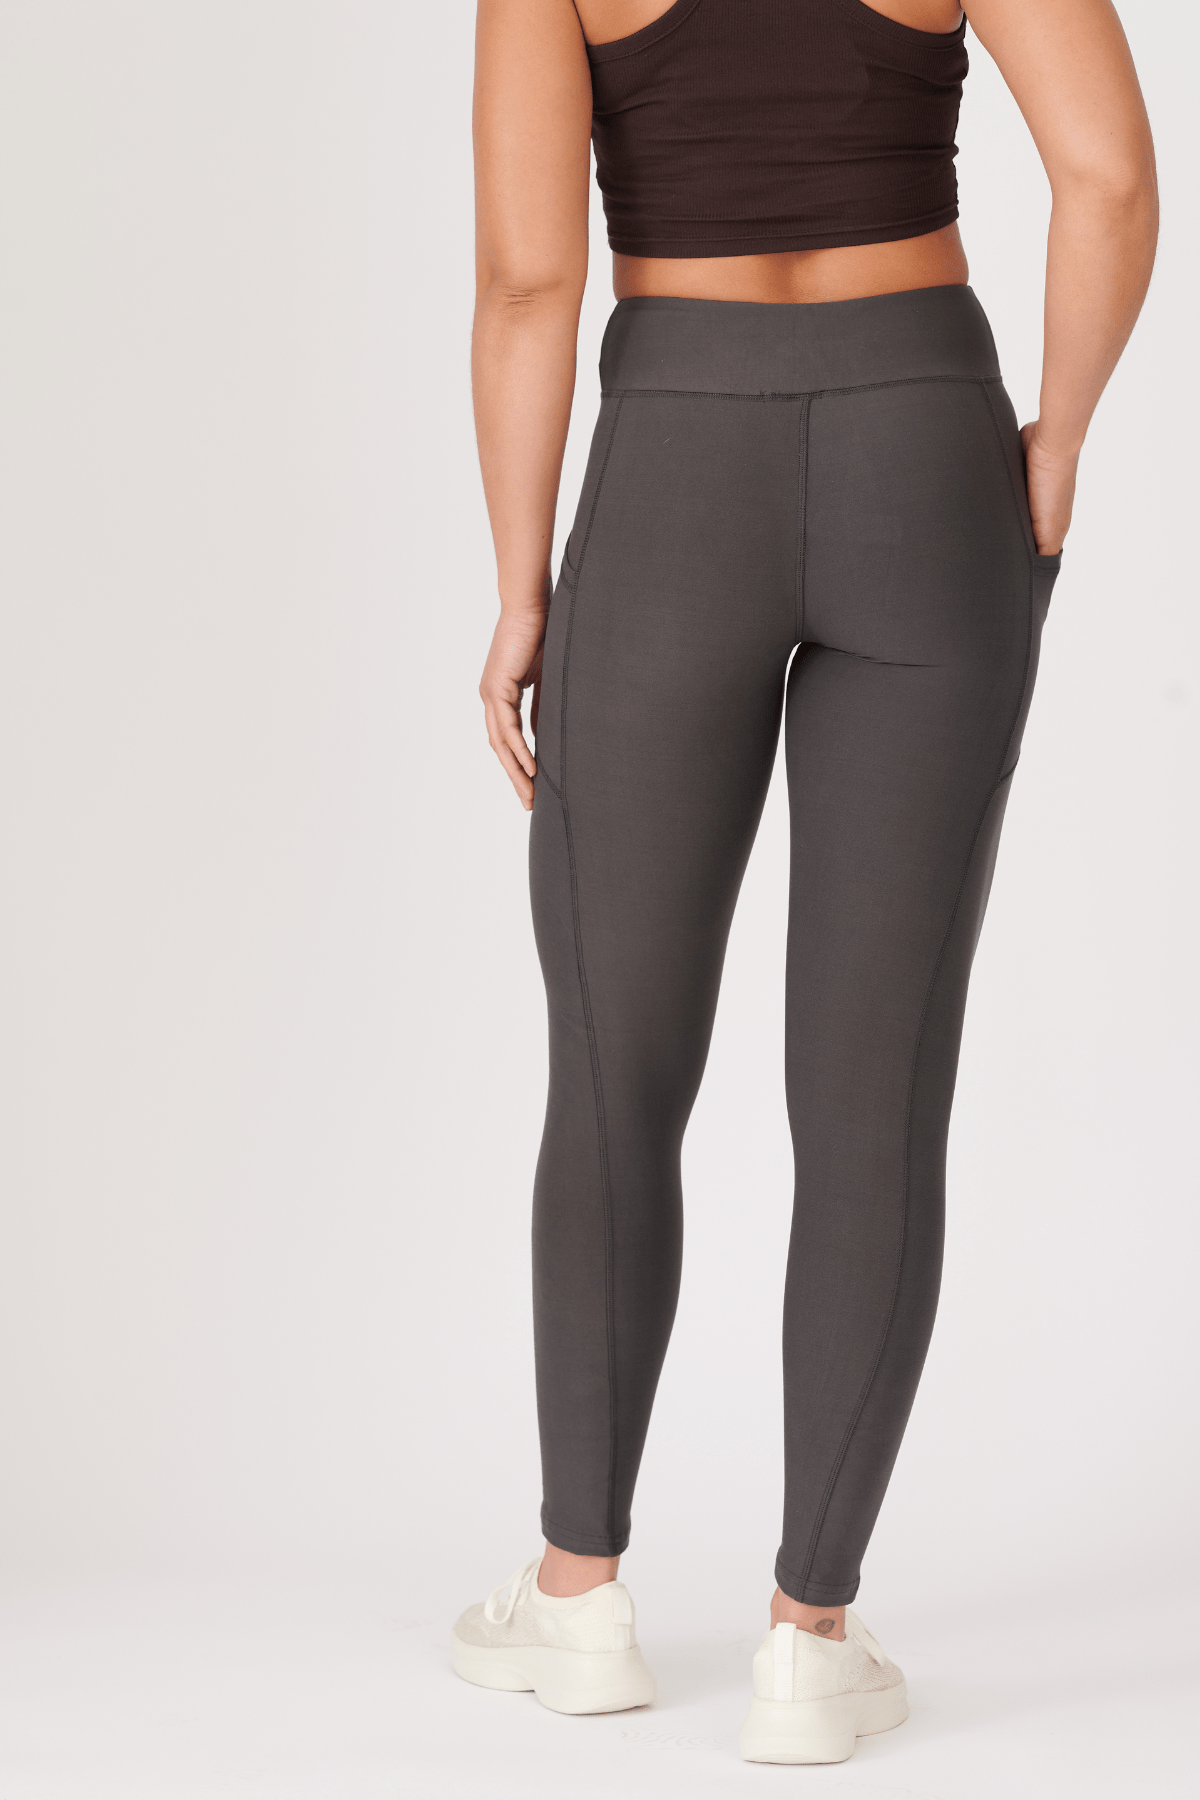 Butter Soft Basic Full Length Leggings in Charcoal – Max & Addy